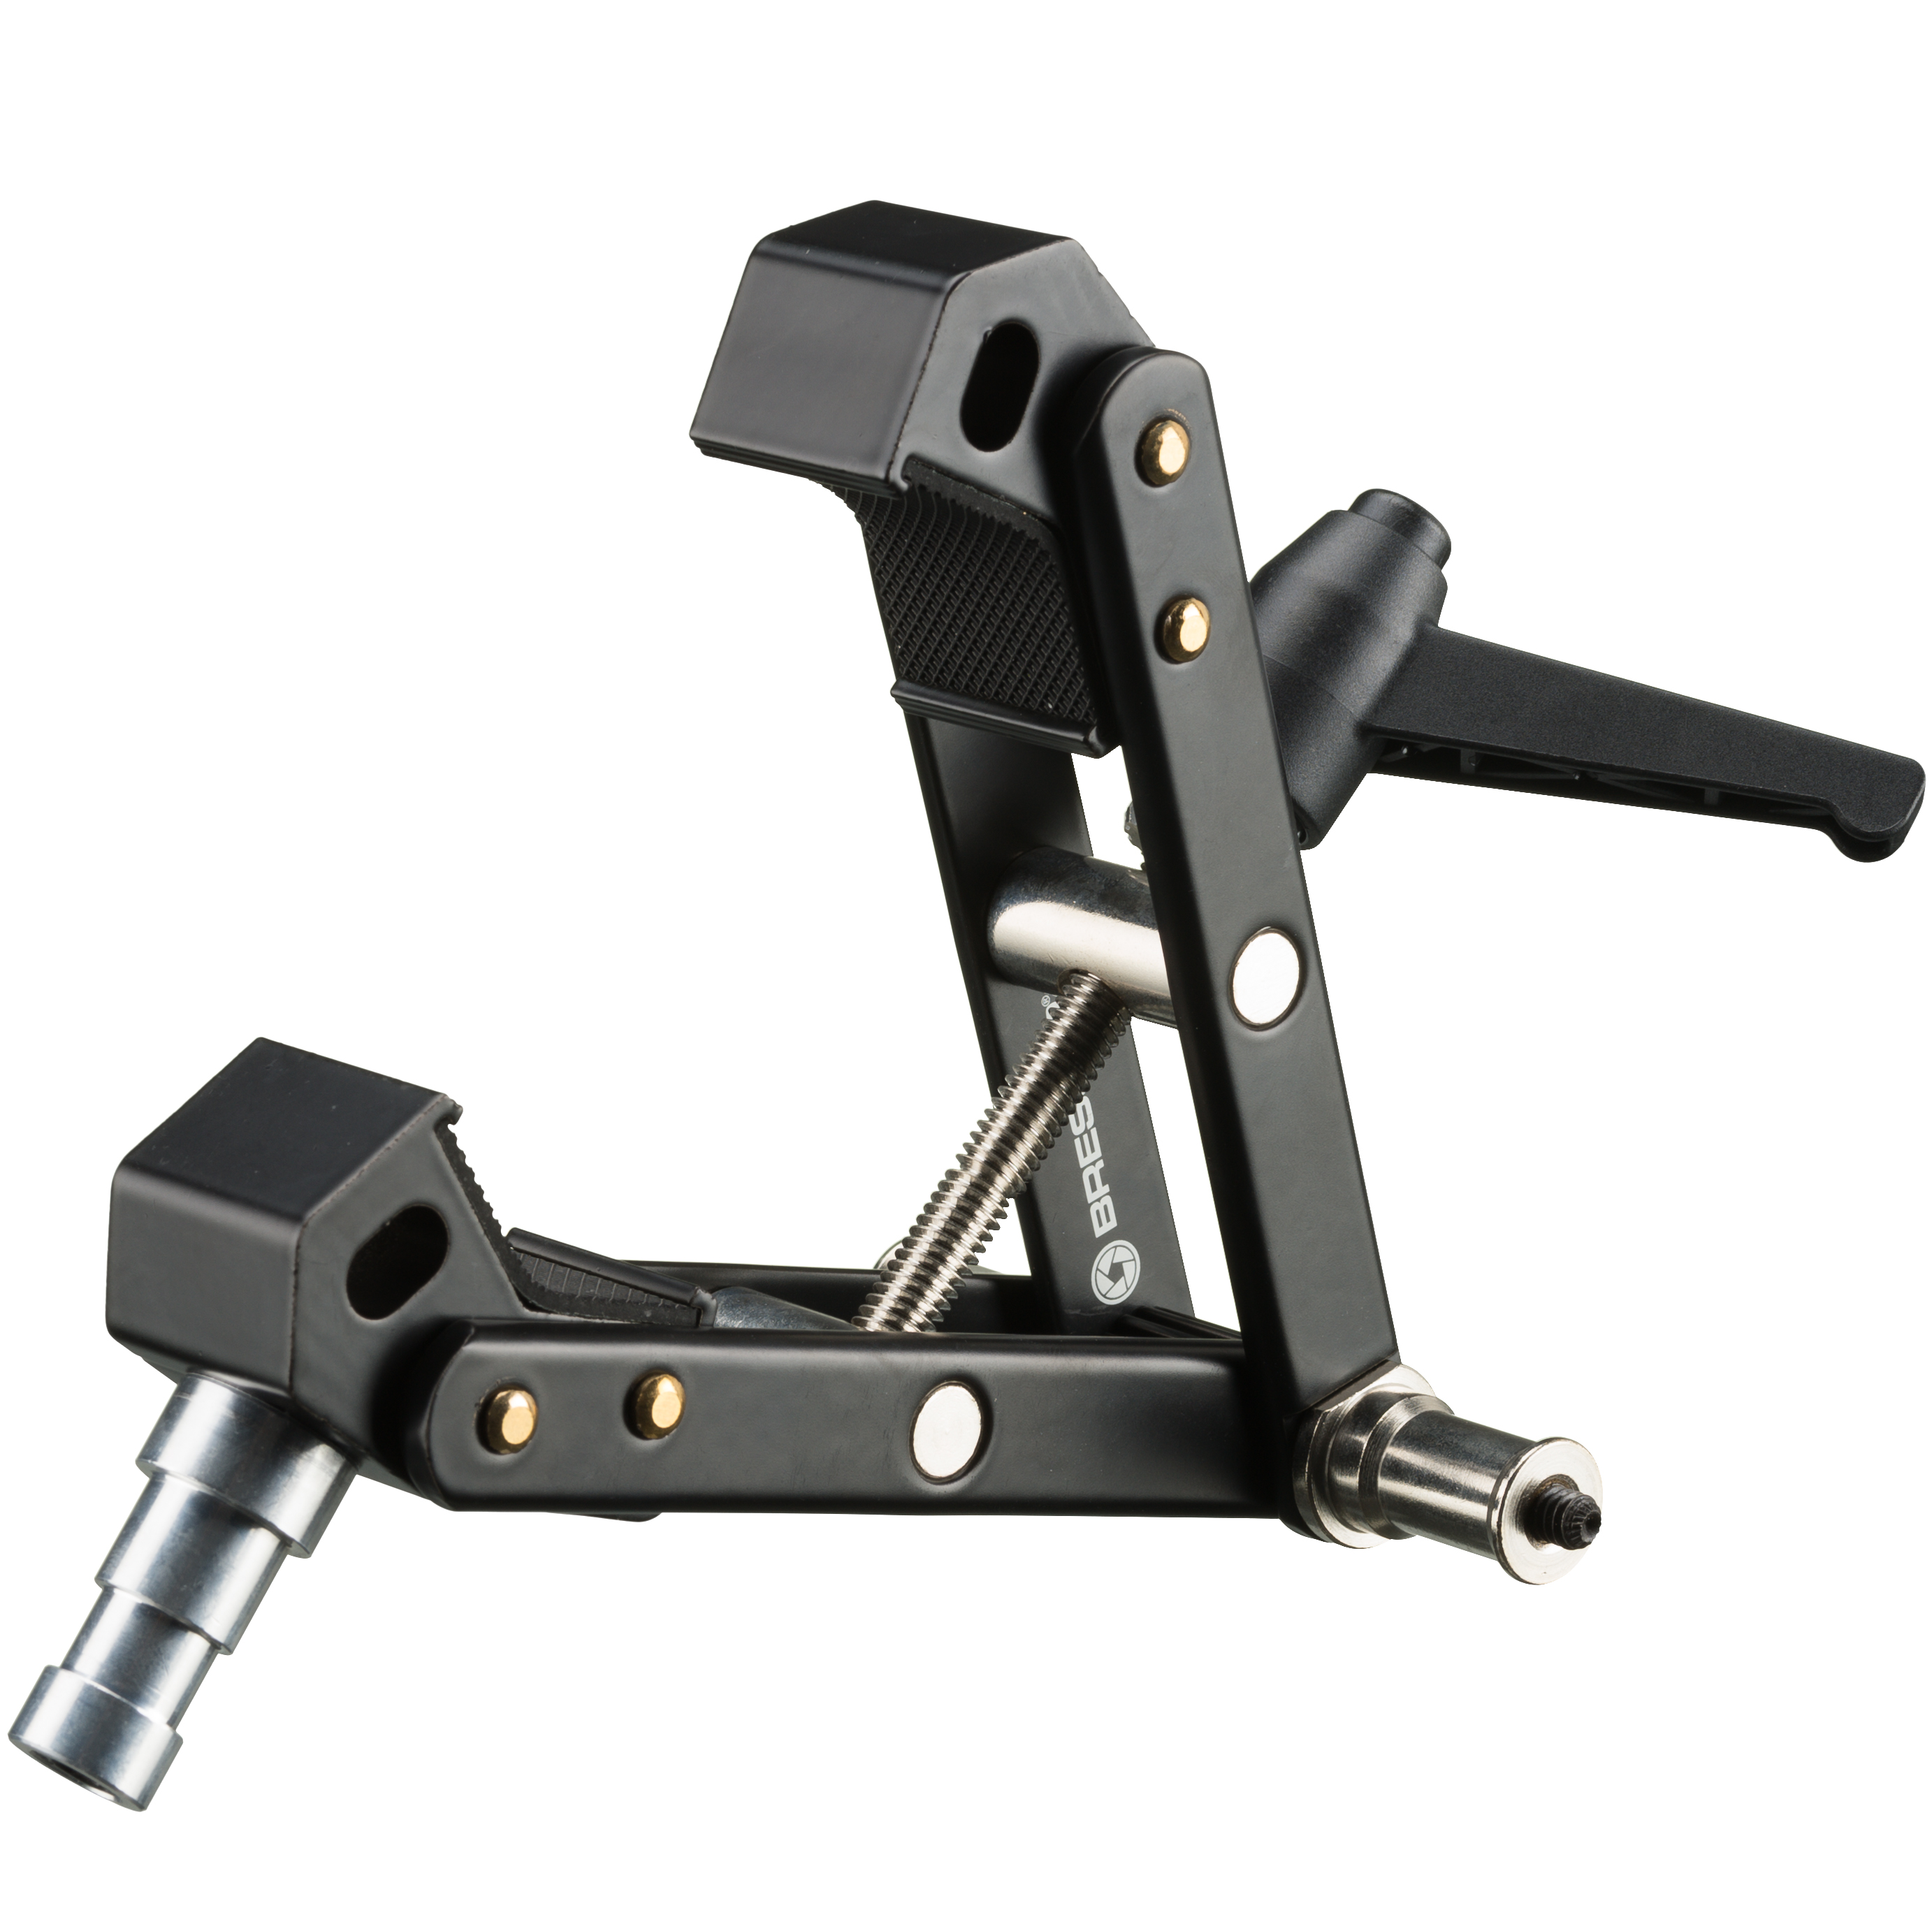 BRESSER BR-SC021 Multi Clamp with 12 kg Load Capacity